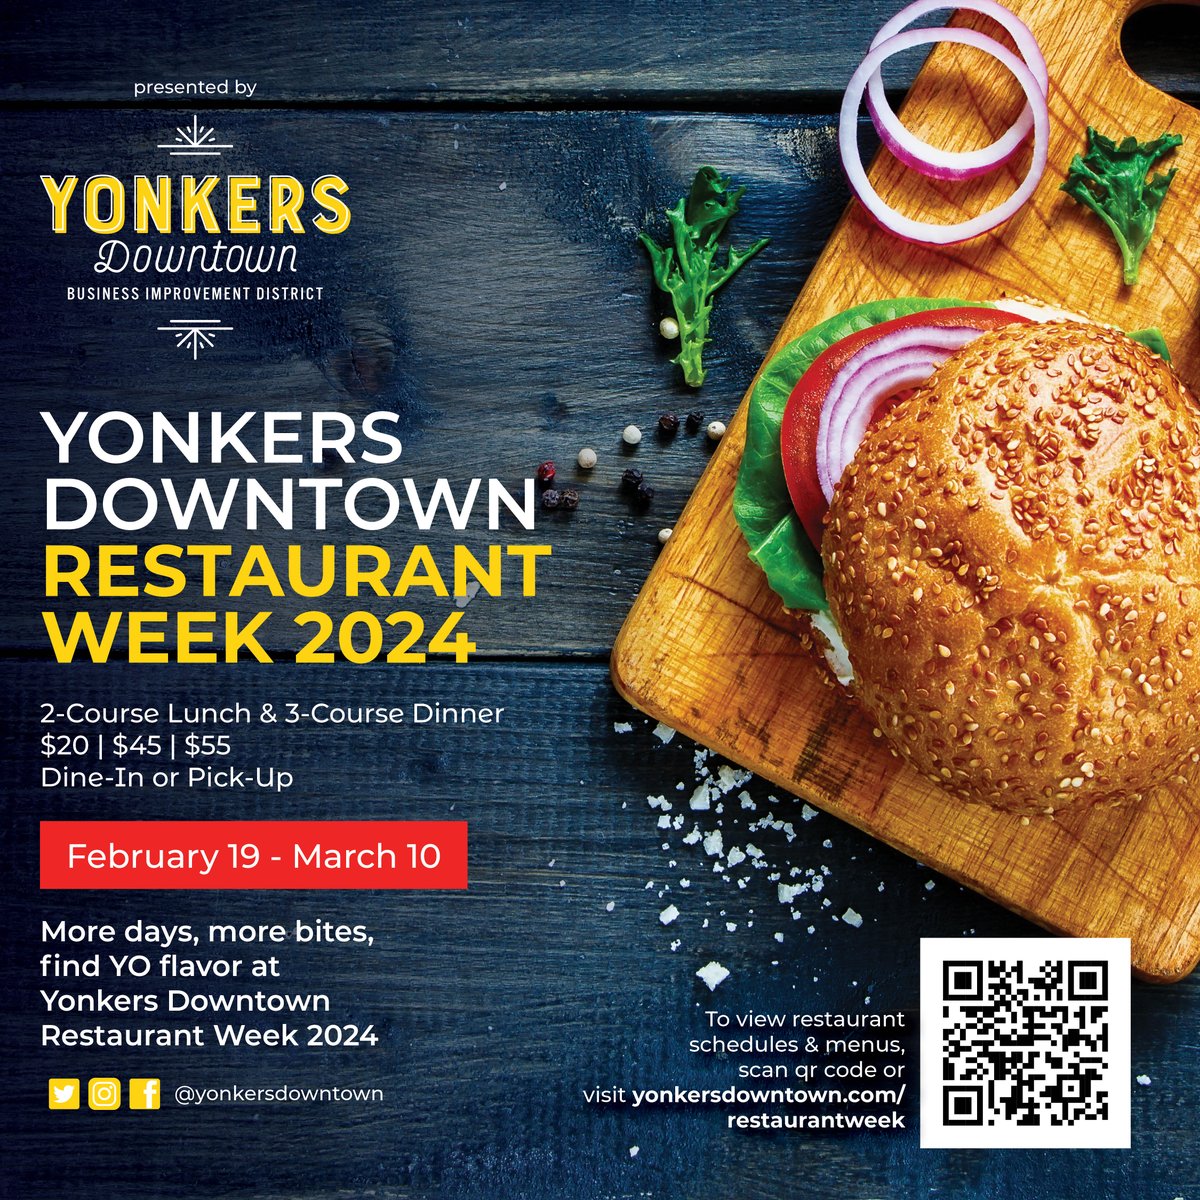 👀 #YonkersDowntownRestaurantWeek is coming soon... For a limited time, you can #FindYOflavor via prix-fixe menus from restaurants in downtown Yonkers. ⁠ 🍕 2-course lunch at $20 🍝 3-course dinner at $45 and $55 ⁠ ❤️ Tag a friend you're planning to dine with 👇 ⁠